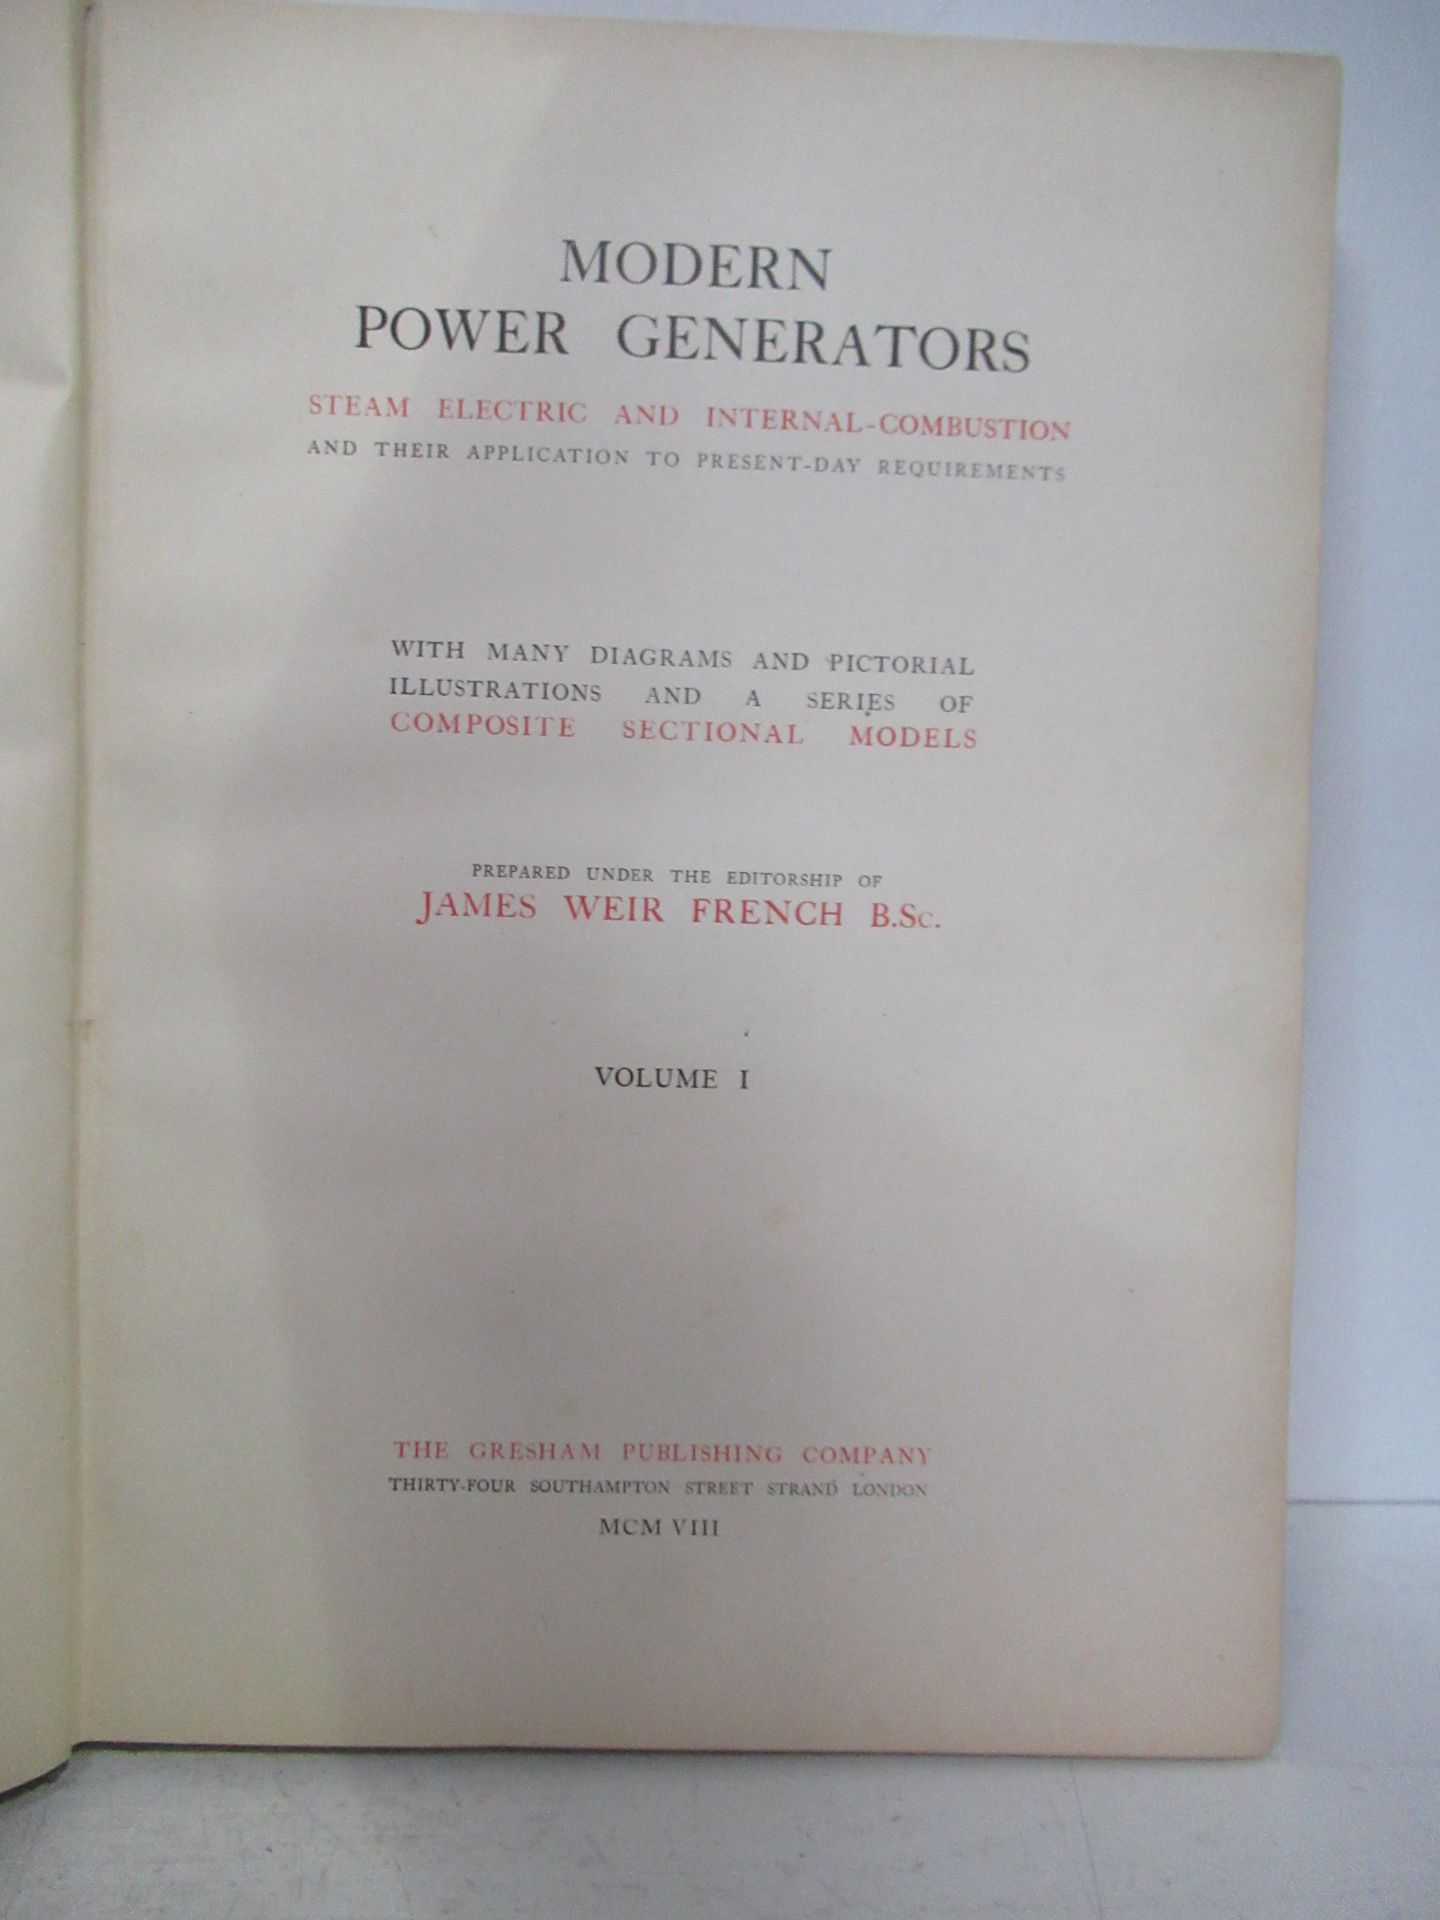 Volumes 1 and 2 of 'Modern Power Generators' - Image 2 of 3